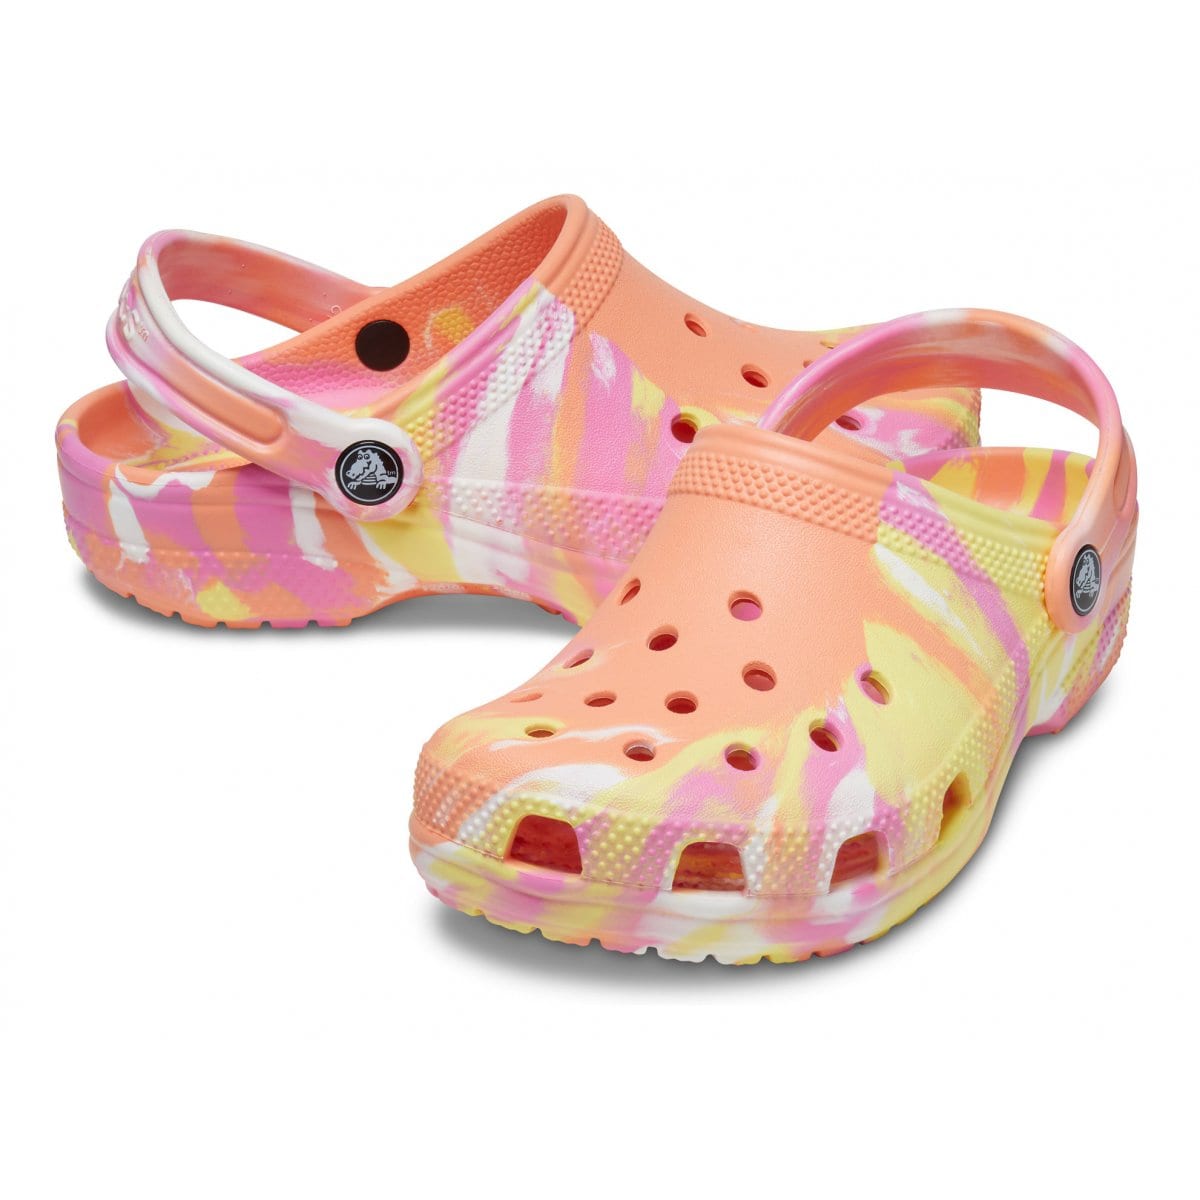 Crocs Glitter Pink Crocs Glitter Pink Crocs Psico Marbled 